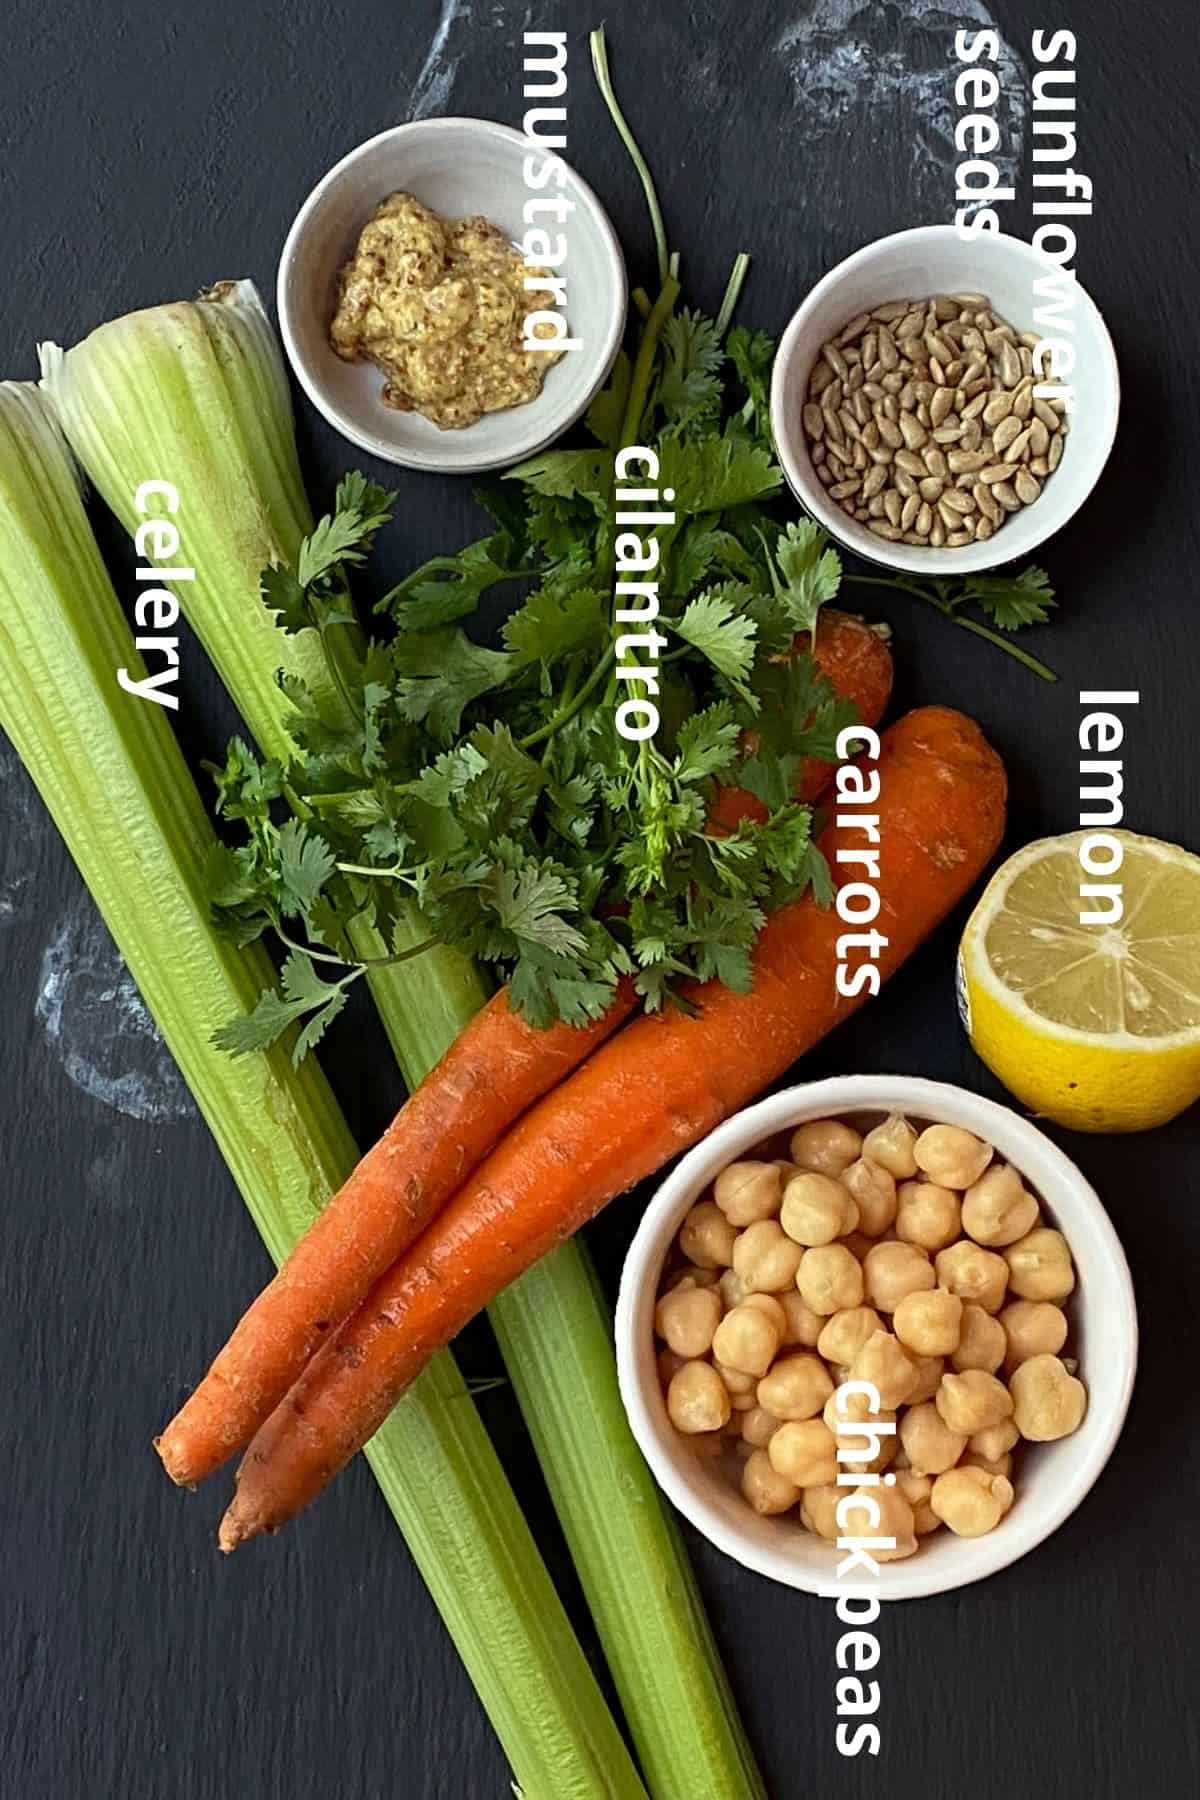 An overhead view of the ingredients to make chickpea tuna salad; sunflower sees, half of lemon, chickpeas, carrots, cilantro, celery, and mustard